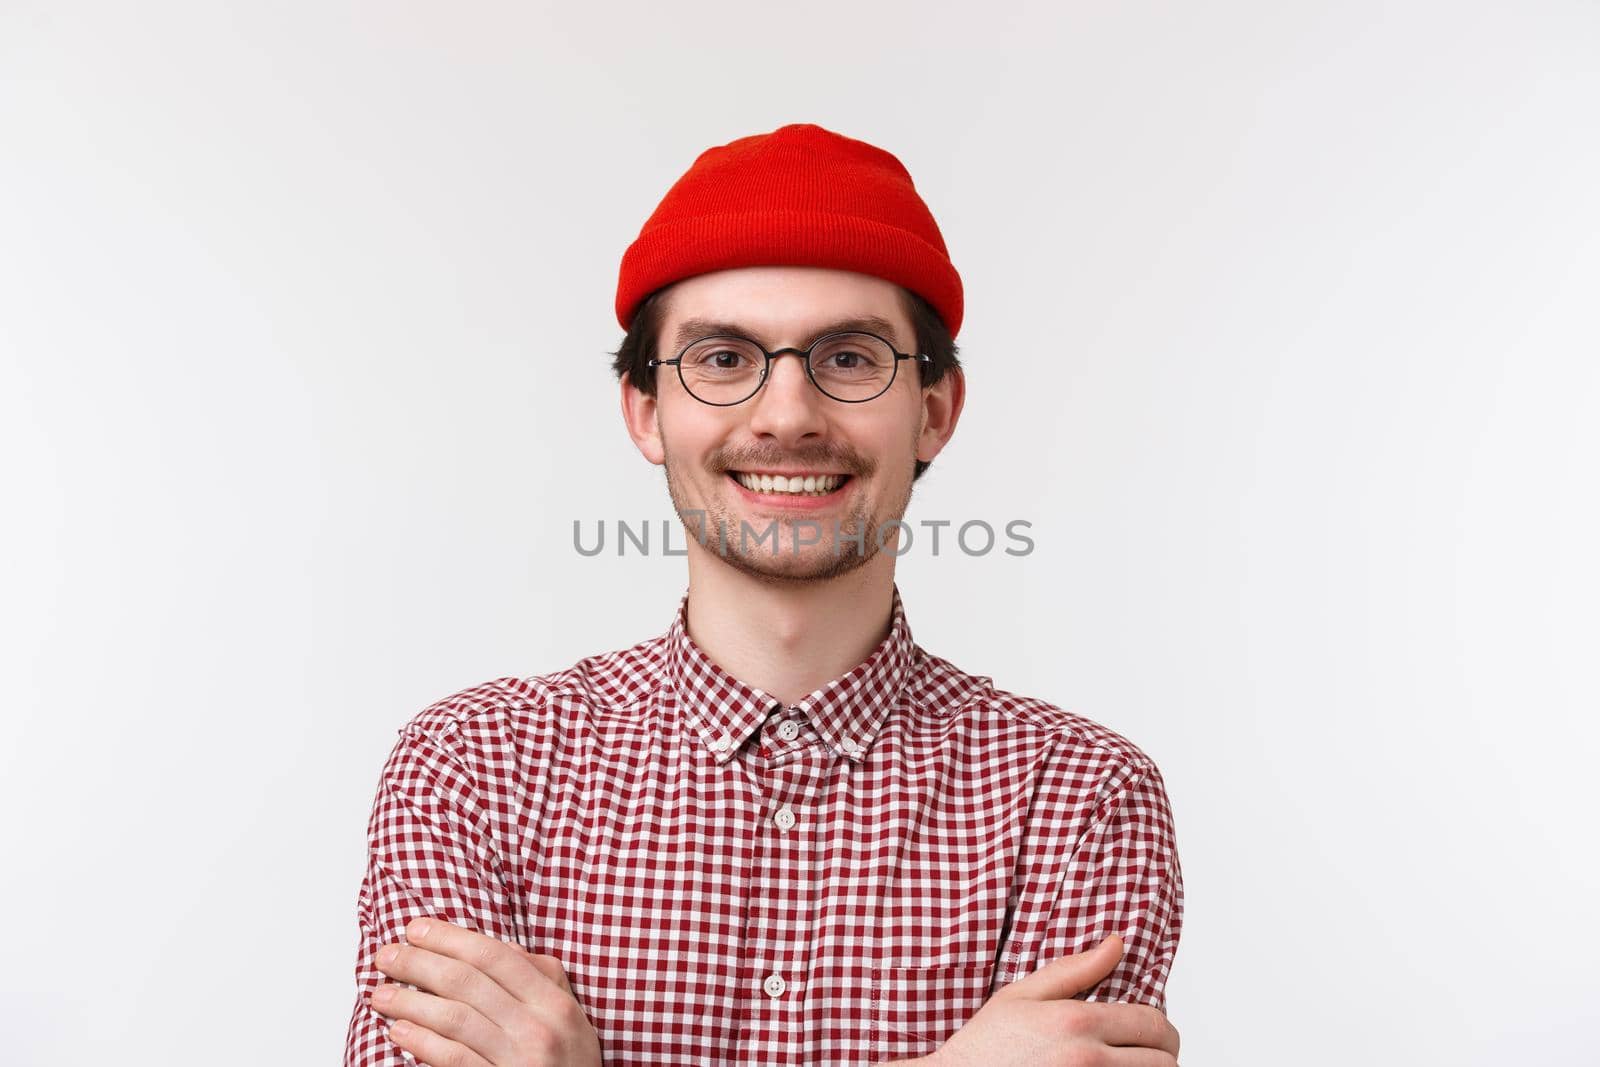 Close-up portrait of confident cheerful young man expressing himself with bright outfit, wear hipster red beanie and checked shirt, cross hands on chest like pro, smiling delighted, white background.